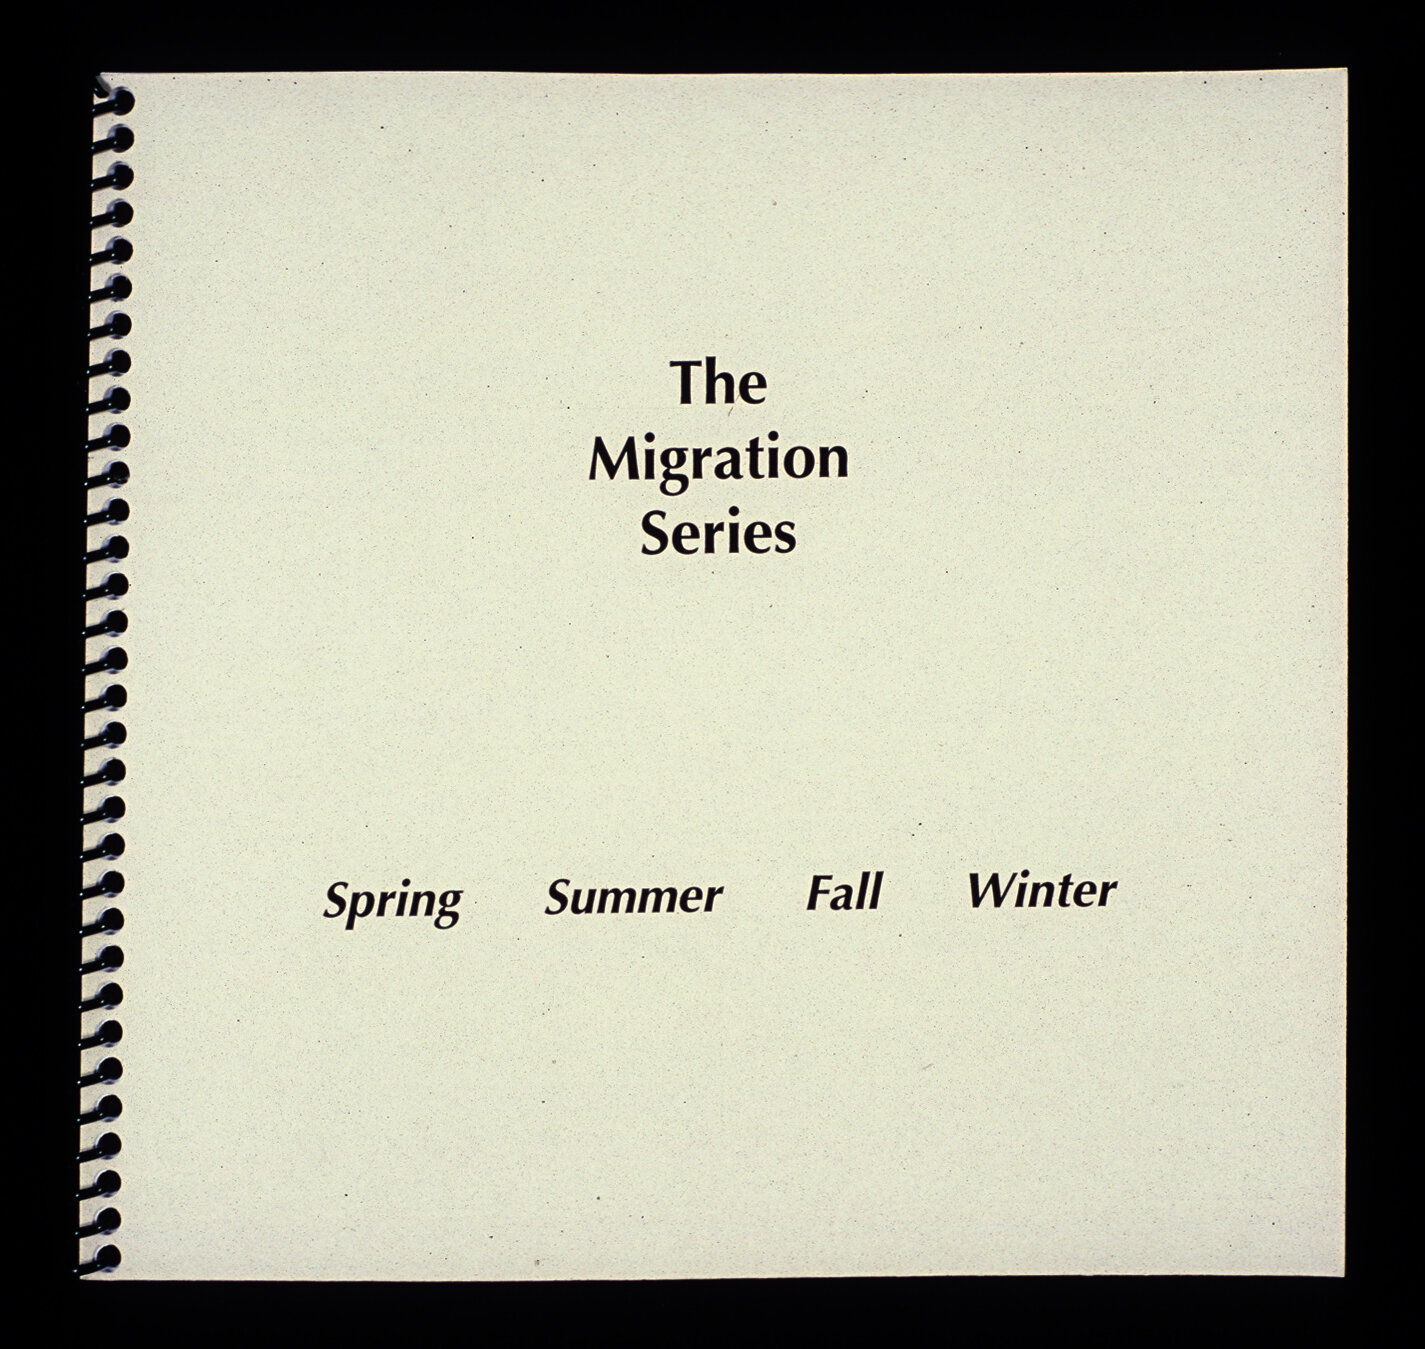 White cover of square spiral bound book with black text reading “The Migration Series, Spring Summer Fall Winter.”